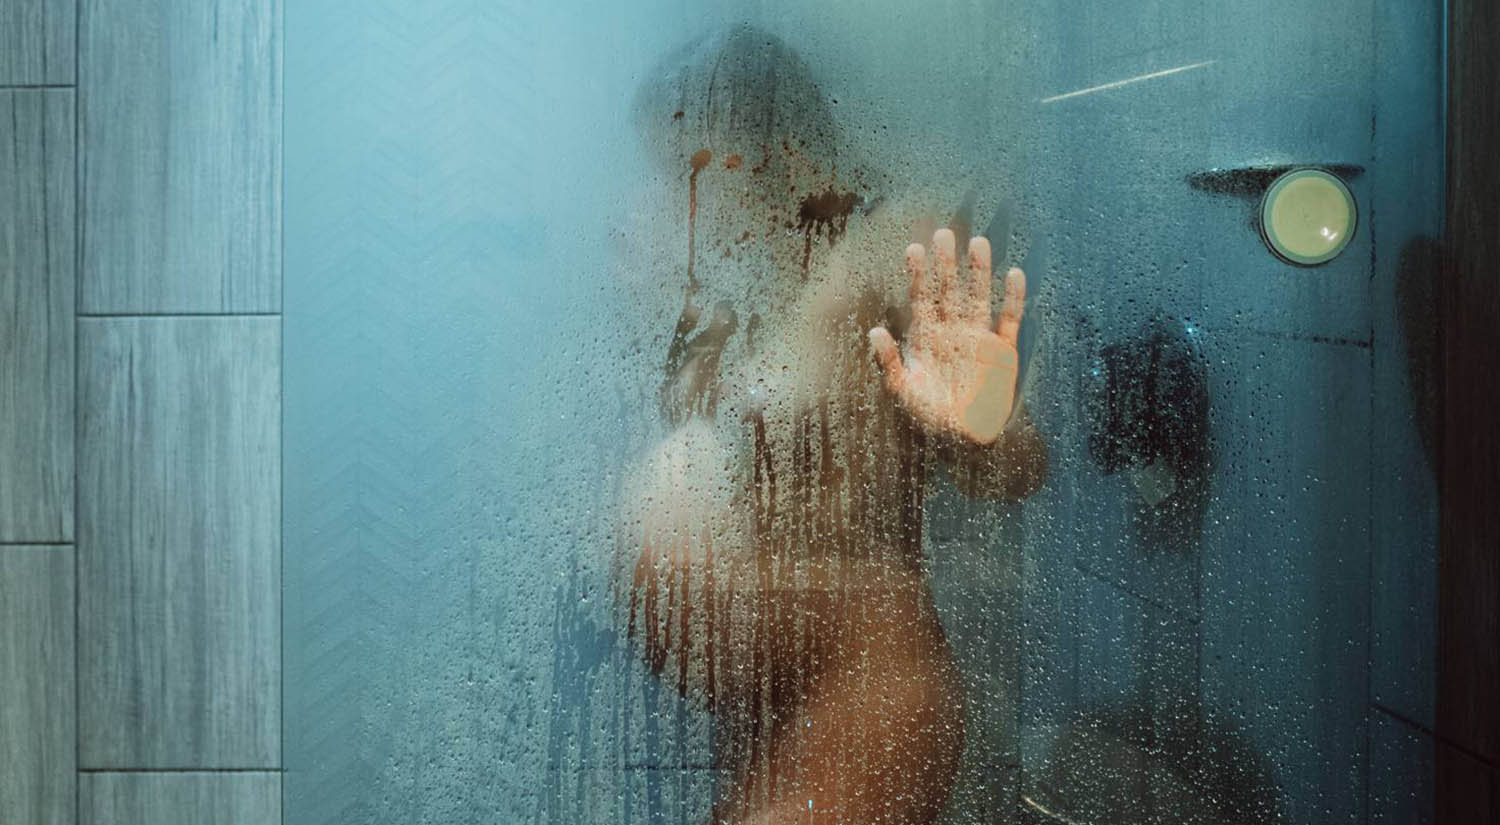 A pregnant woman's outline is seen through a foggy show door